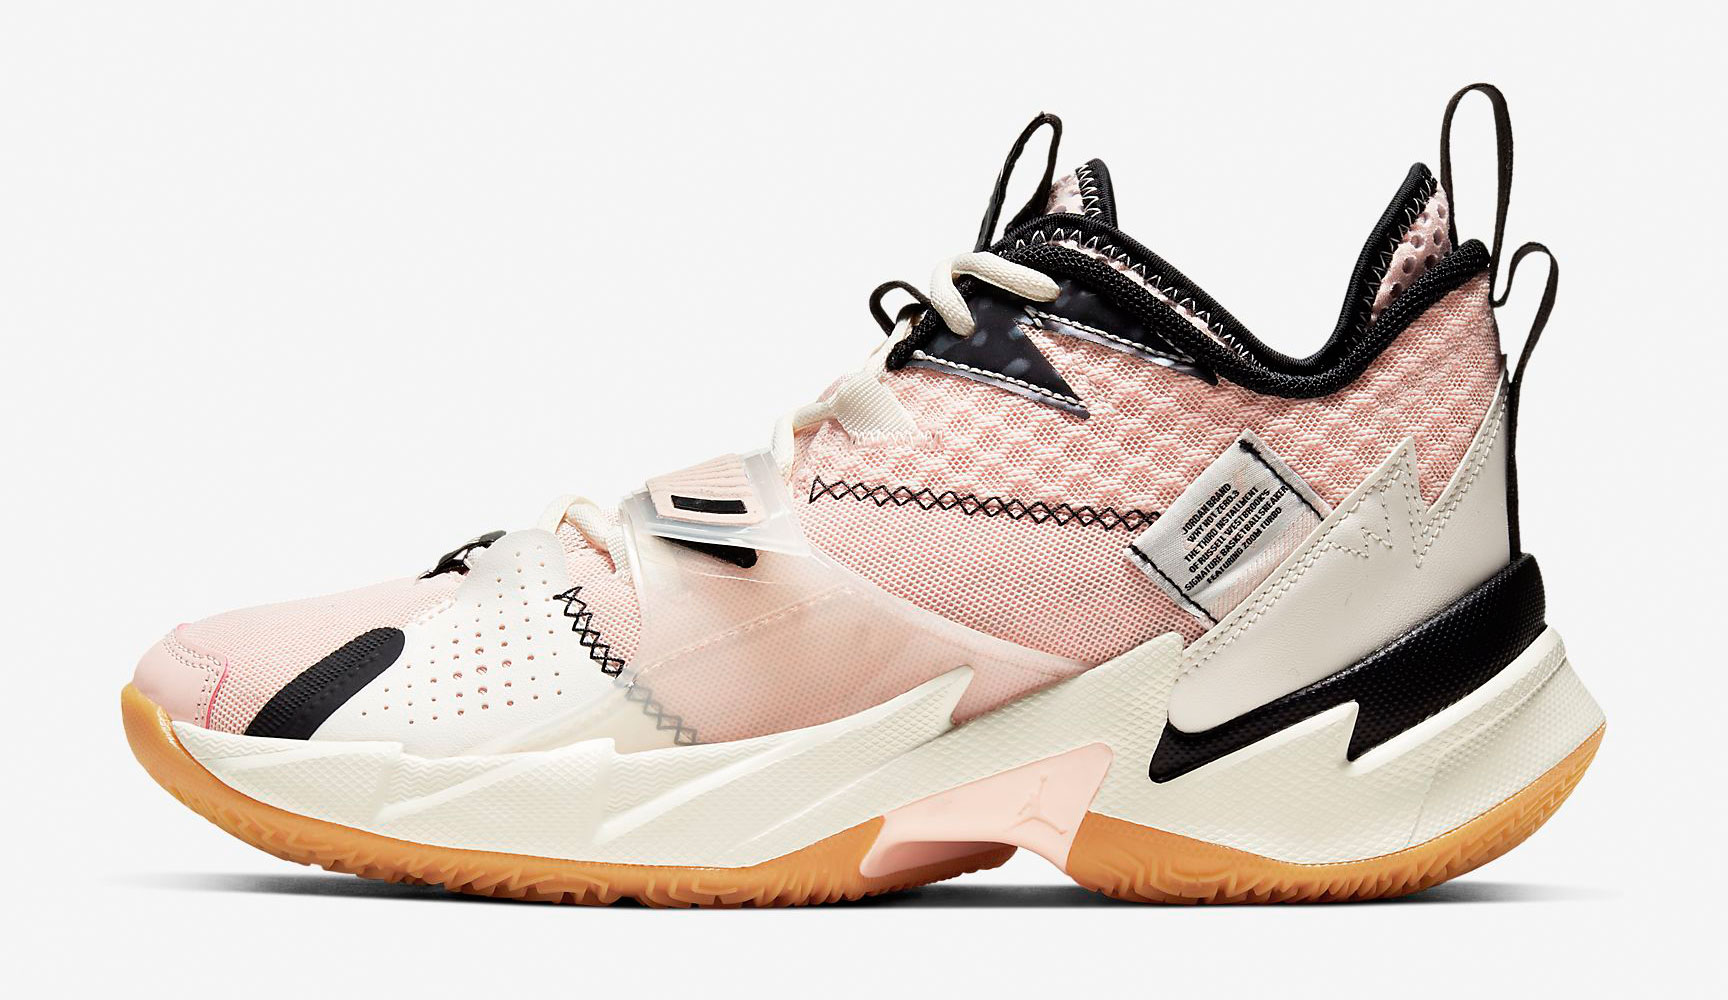 jordan-why-not-zer03-washed-coral-release-date